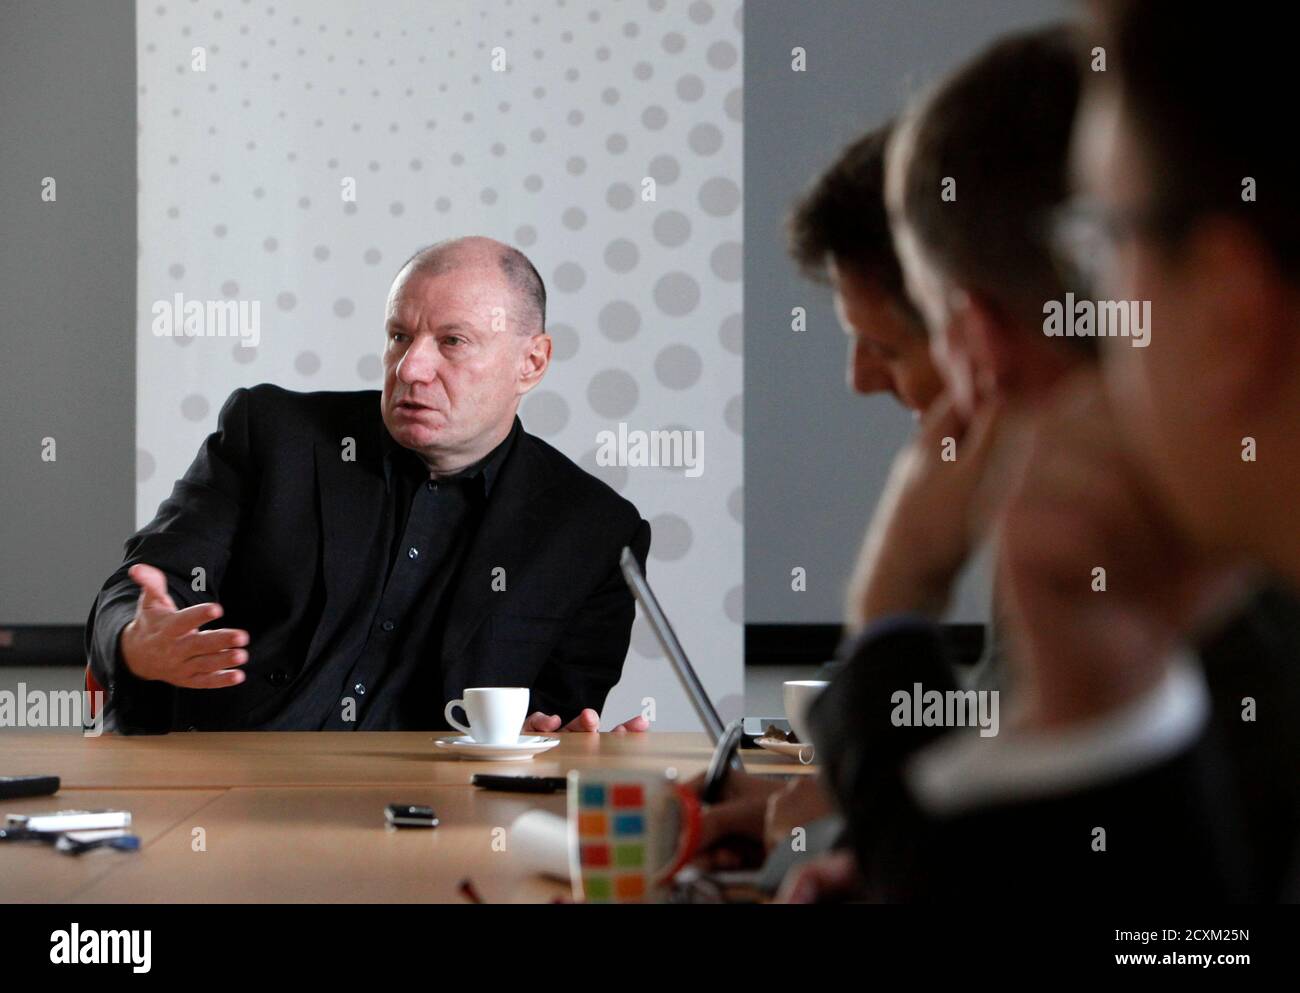 Interros President Vladimir Potanin answers journalists' questions during the Reuters Russia Investment Summit in Moscow September 27, 2012. REUTERS/Alexey Petrov (RUSSIA - Tags: BUSINESS PROFILE) Stock Photo